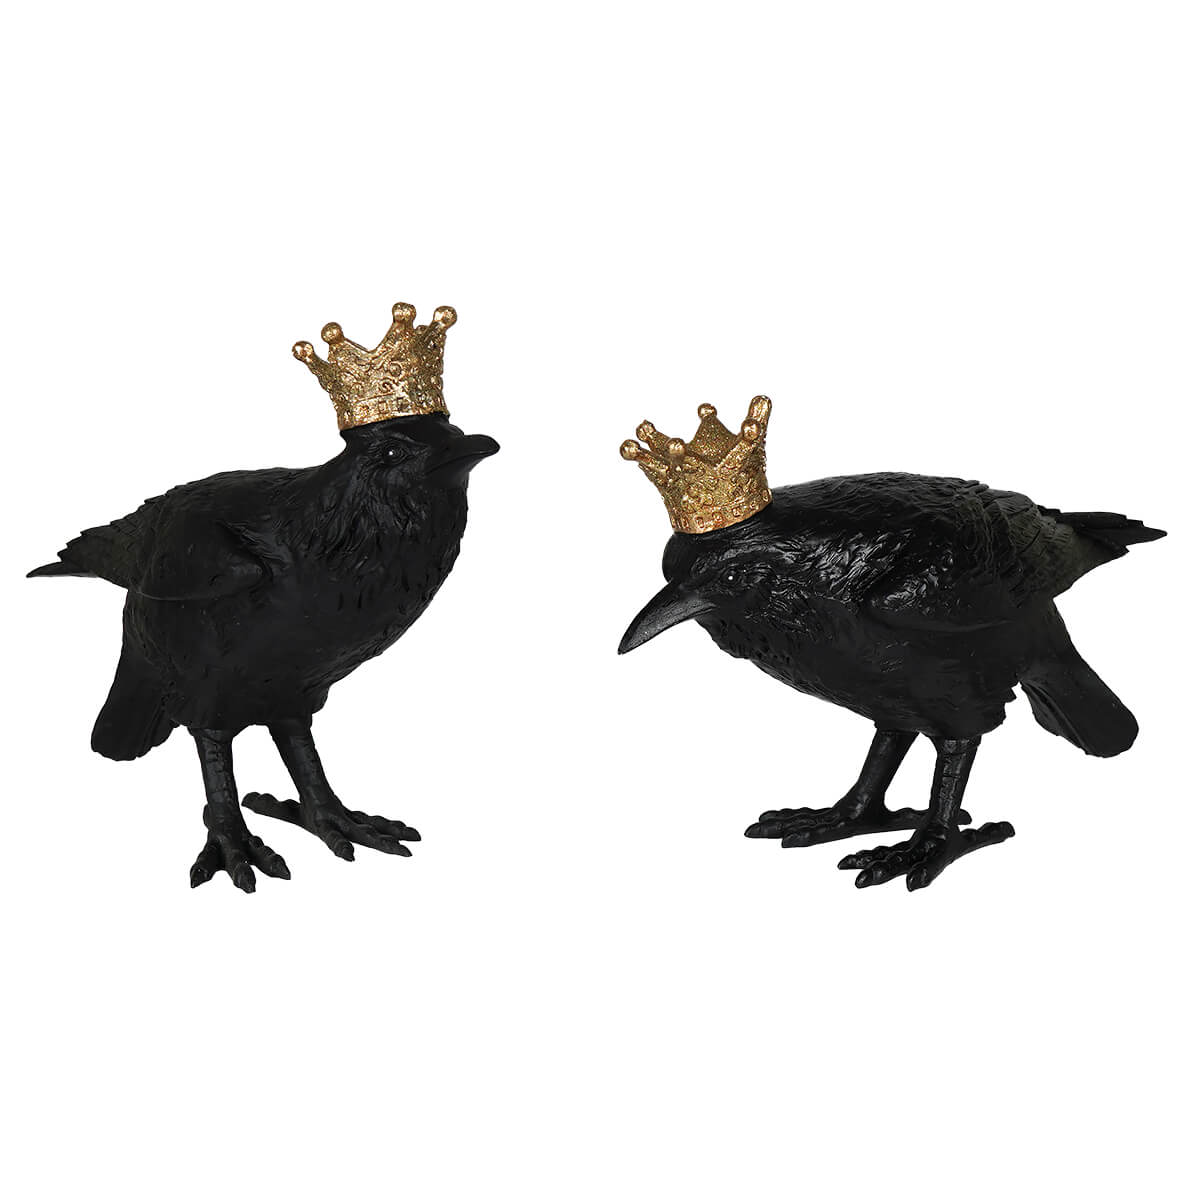 Black Crows with Crowns Set/2